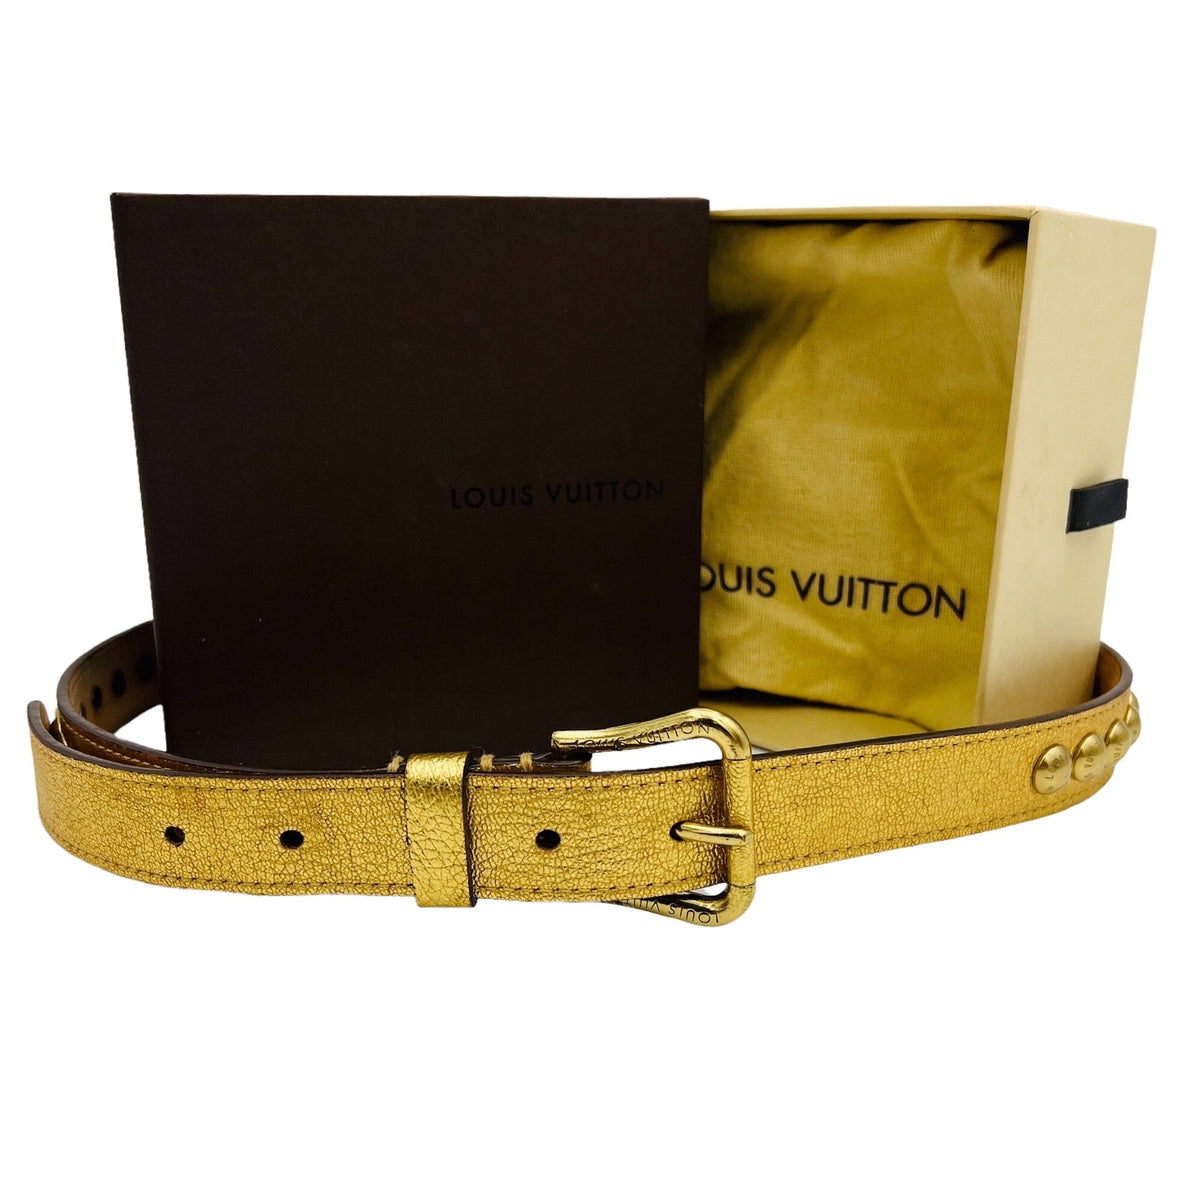 LOUIS VUITTON Authentic belt with box golden tone buckle leather